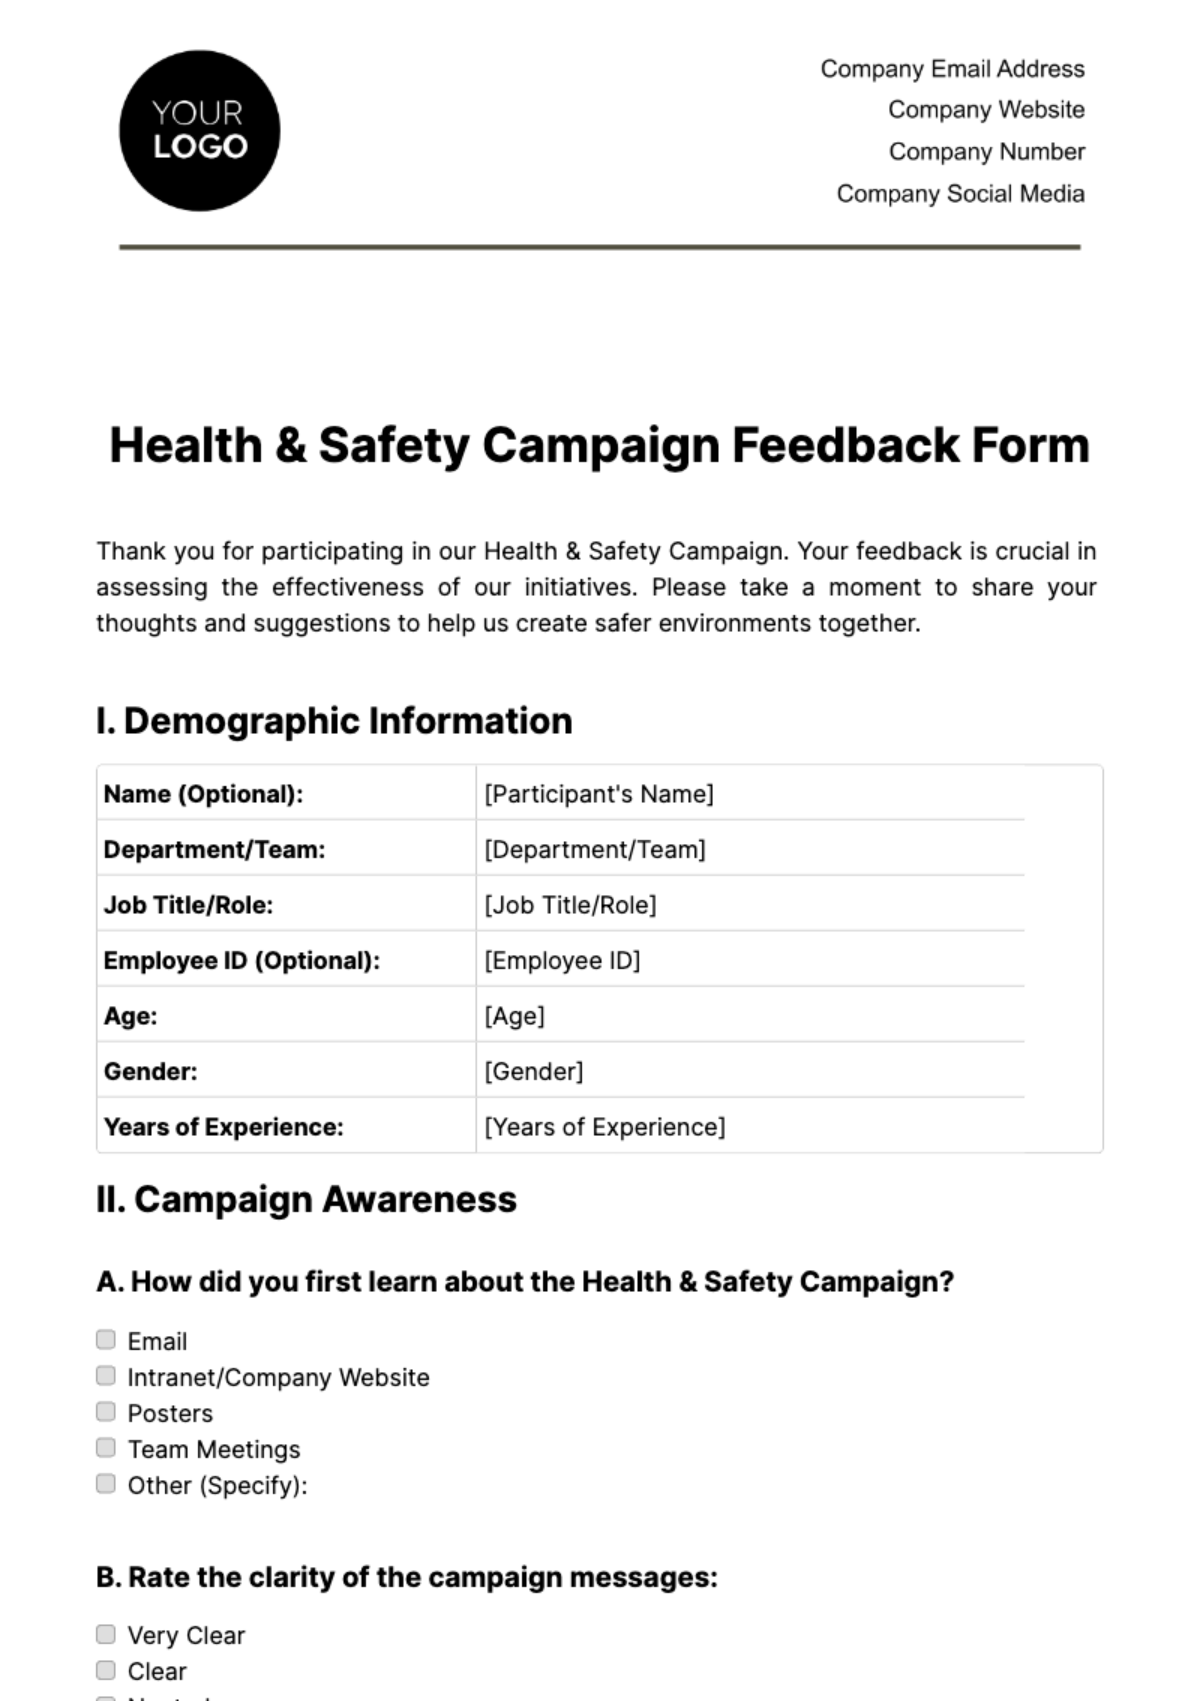 Free Health & Safety Campaign Feedback Form Template